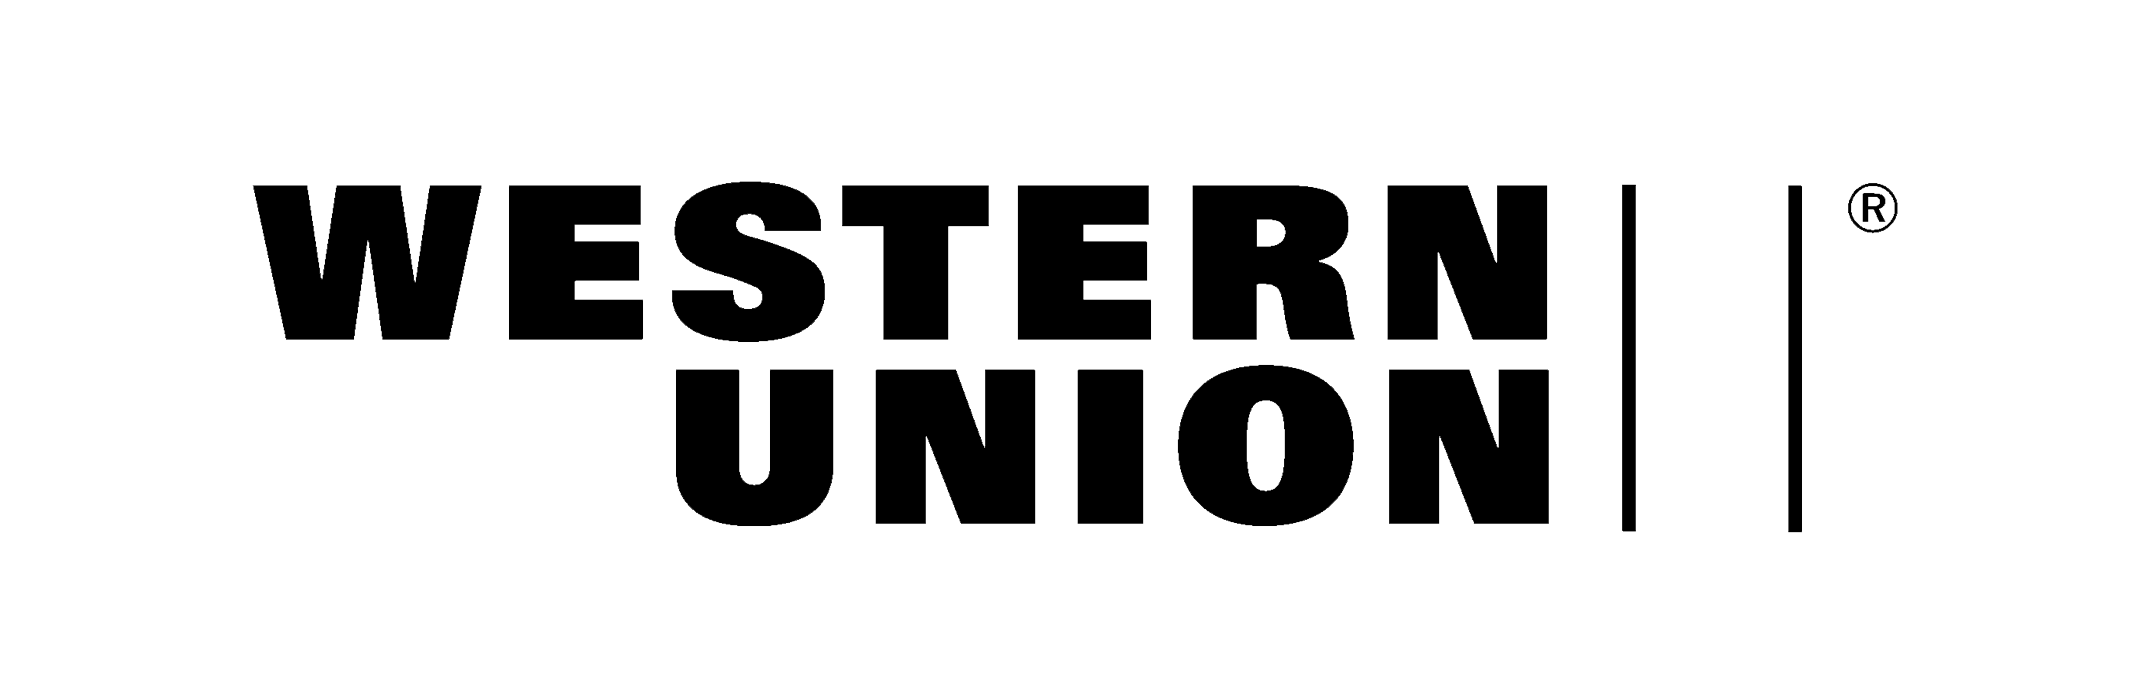 western union payment logo